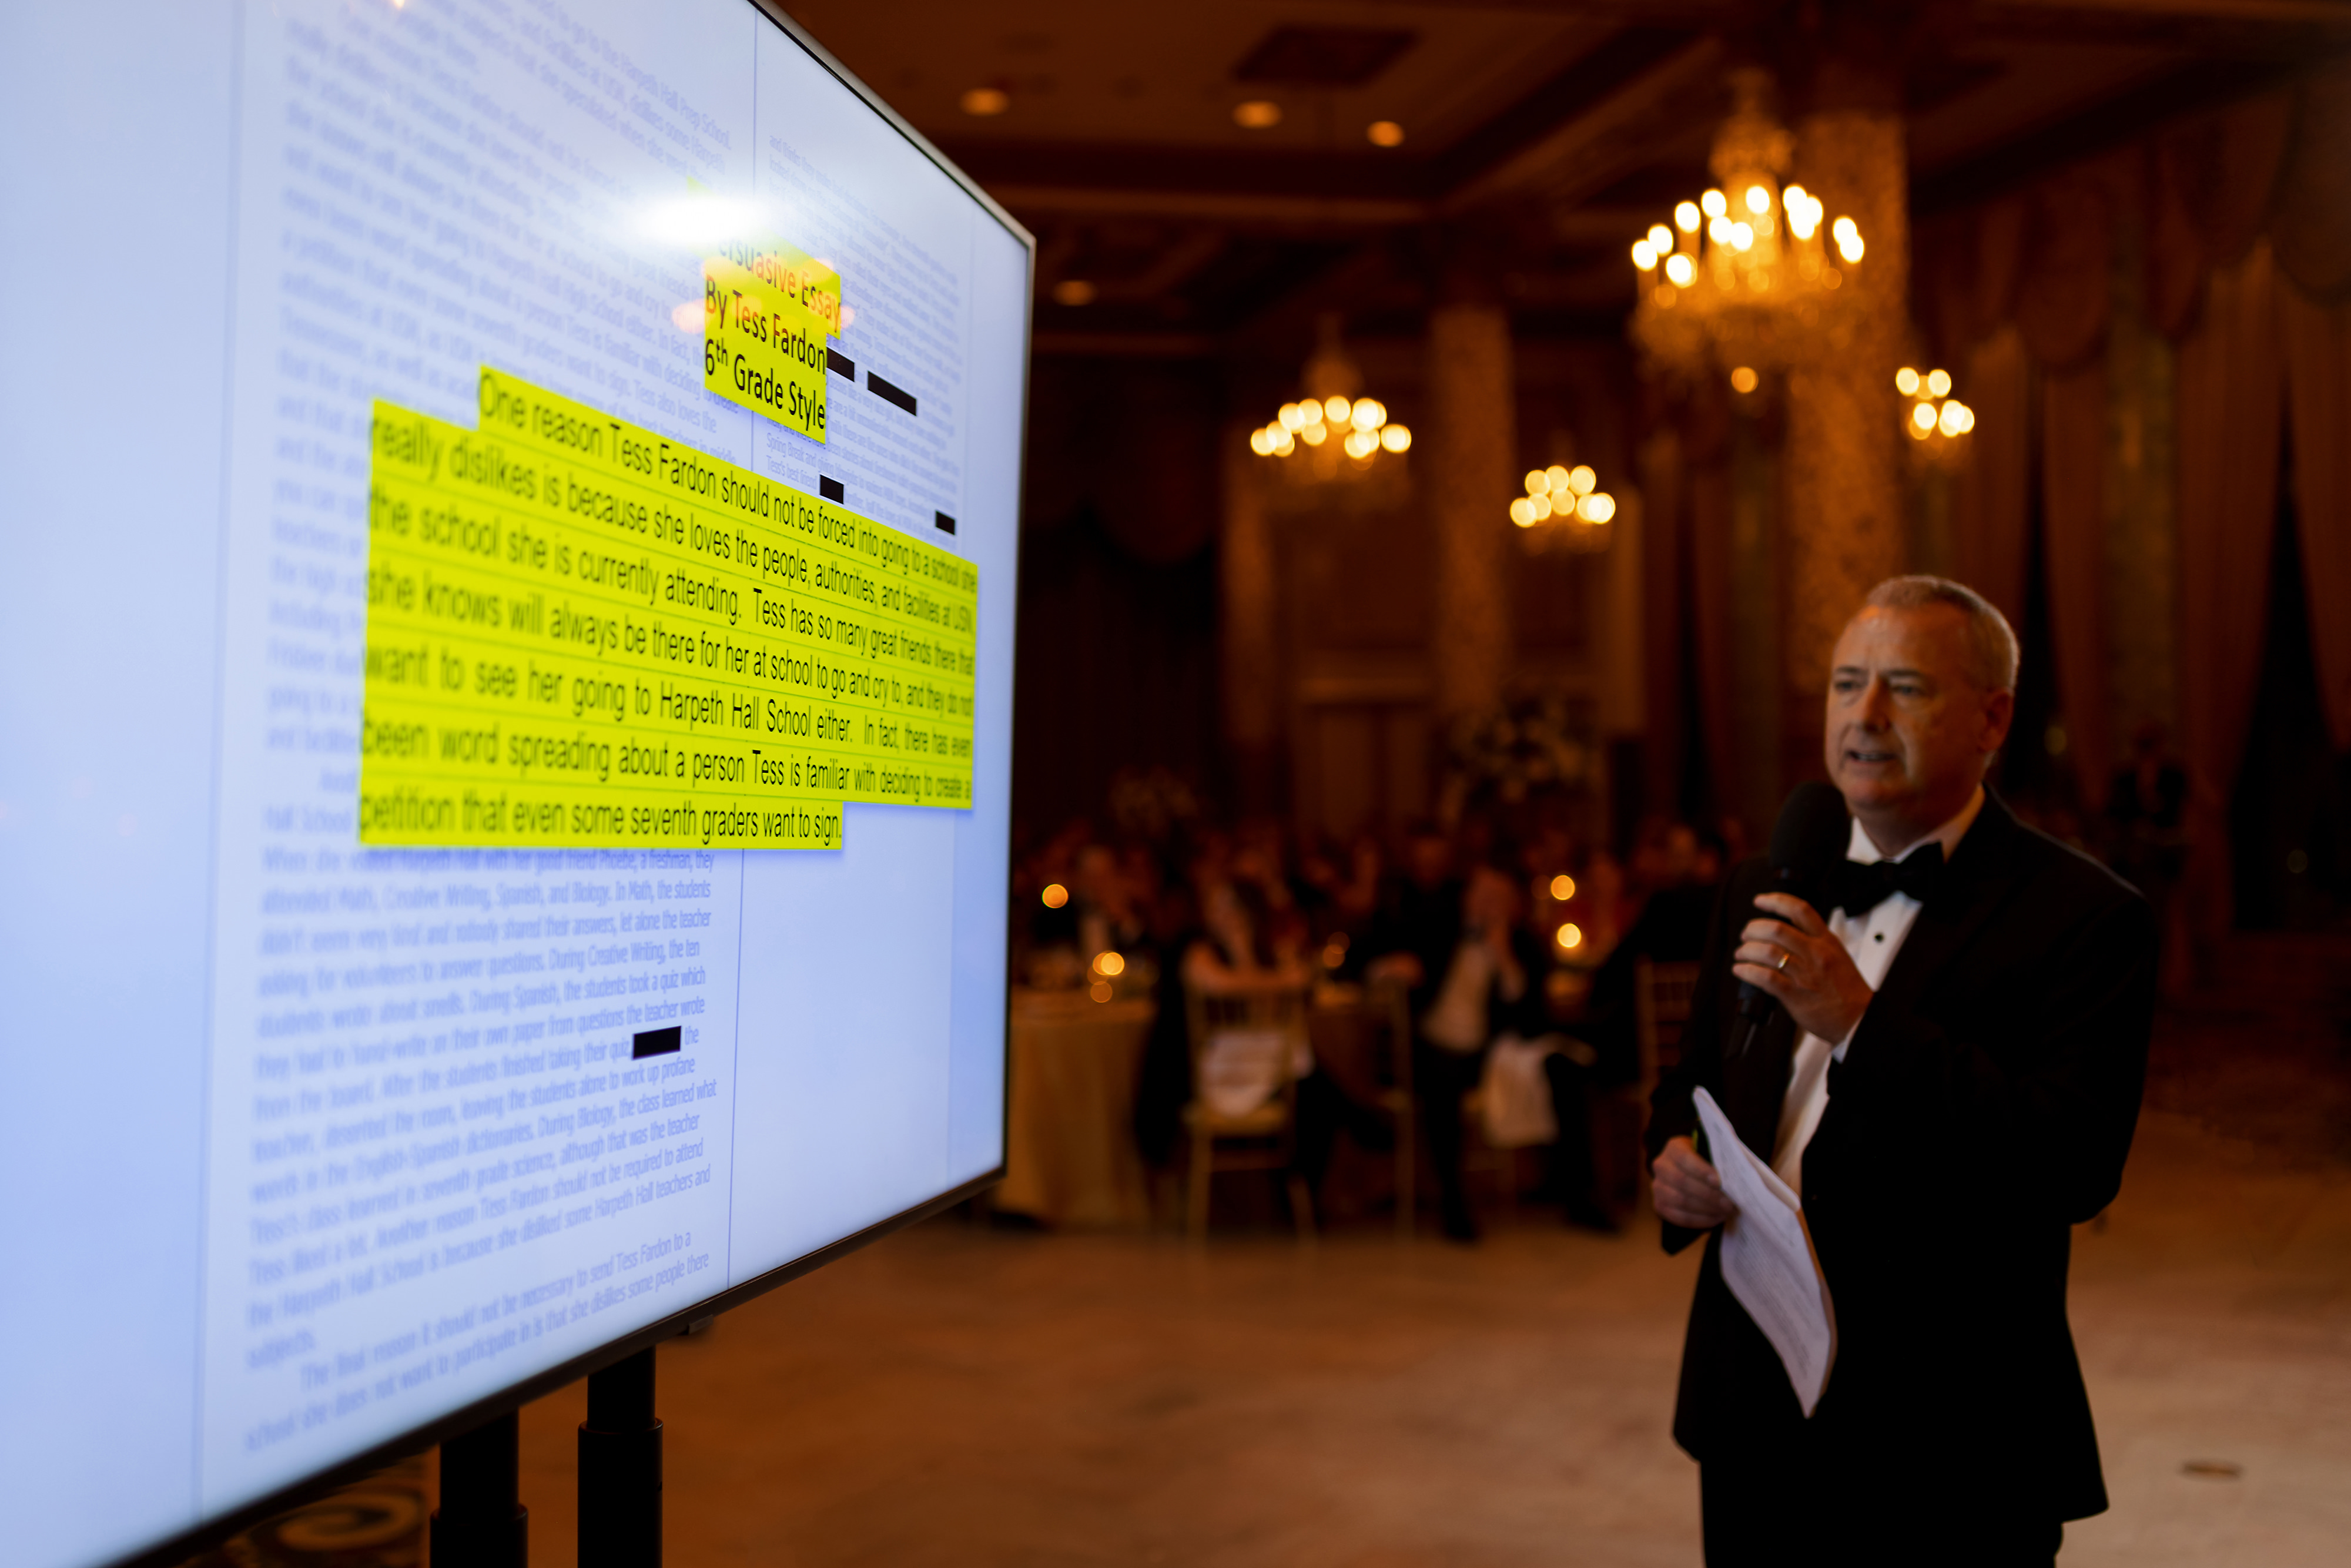 Father of the bride gives powerpoint presentation during toast at wedding reception in the Grand Ballroom at The Drake Hotel in Chicago